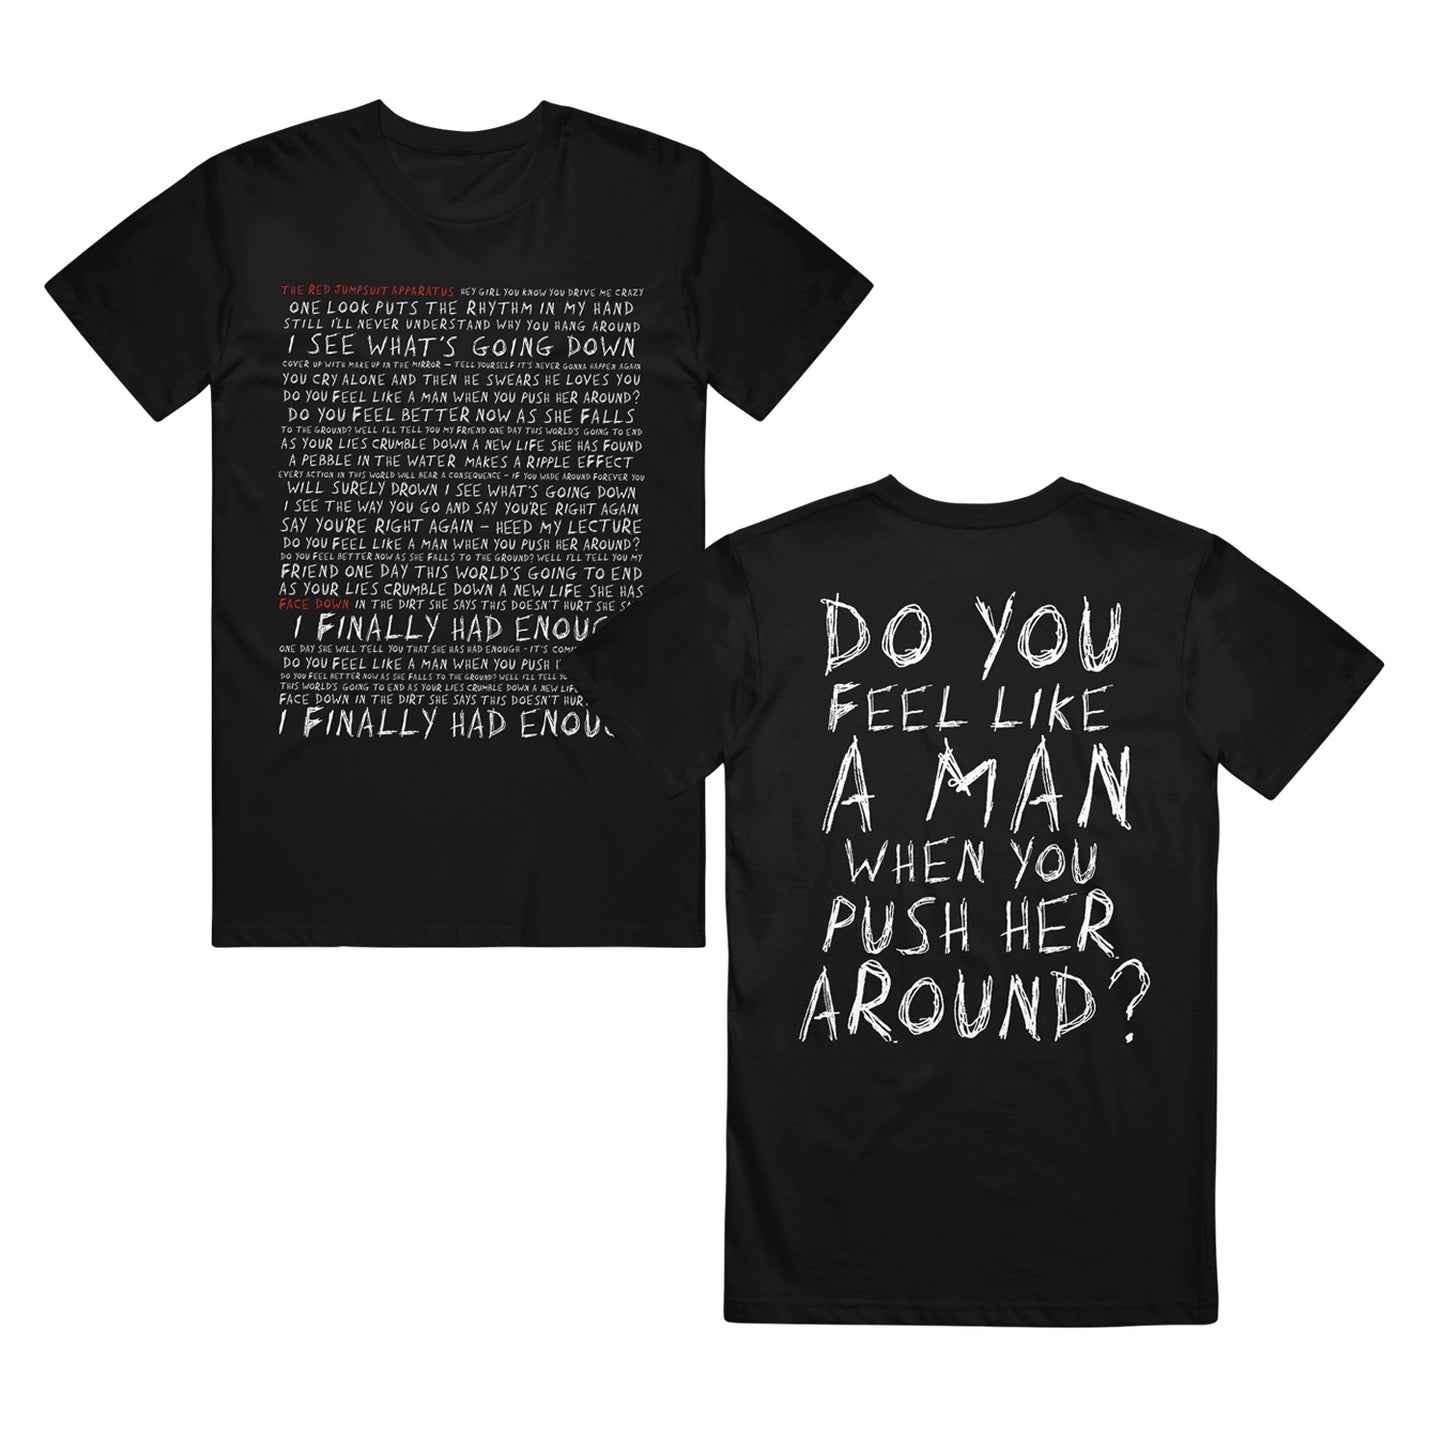 image of the front and back of a black tee shirt on a white background. the front of the tee is on the left and has a full body print in white of the lyrics to red jumpsuit apparatus' song face down. the back of the tee is on the right and has a full back print in white that says do you feel like a man when you push her around?